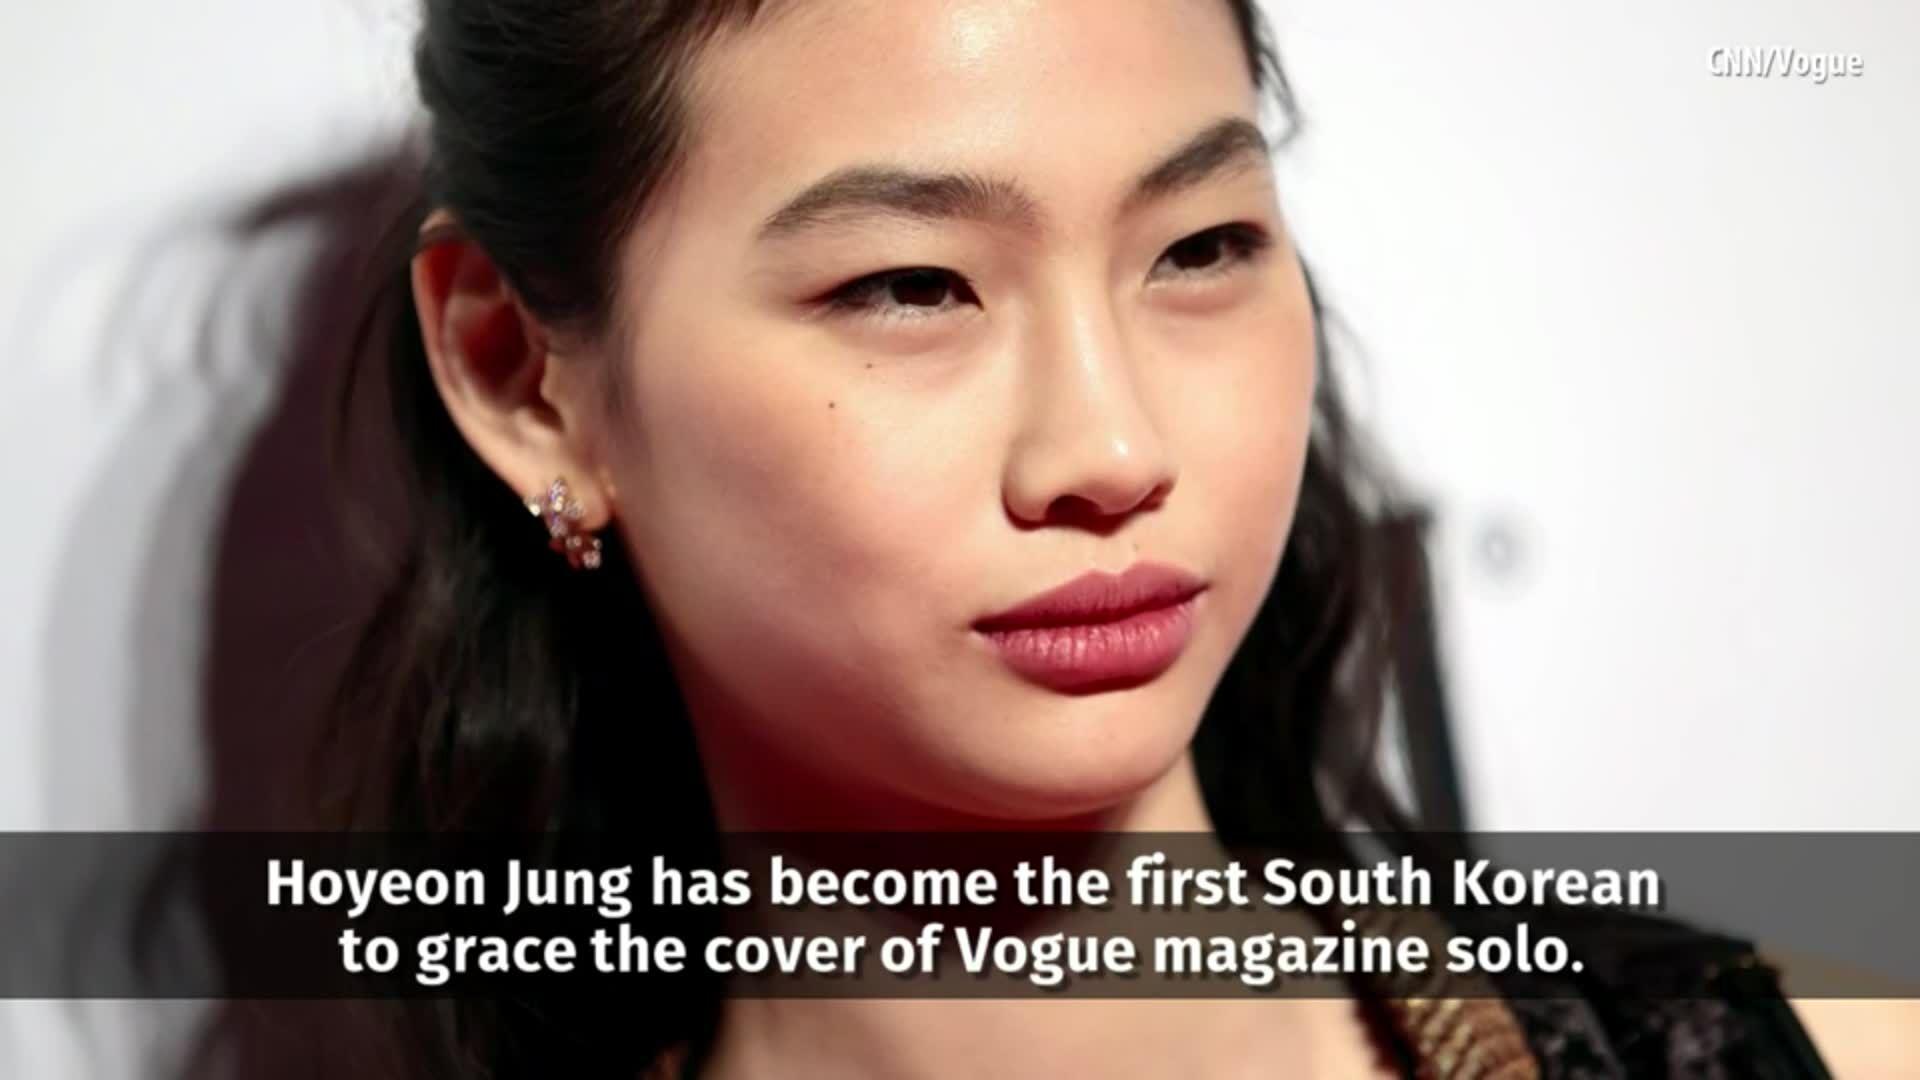 Jung on Vogue February cover